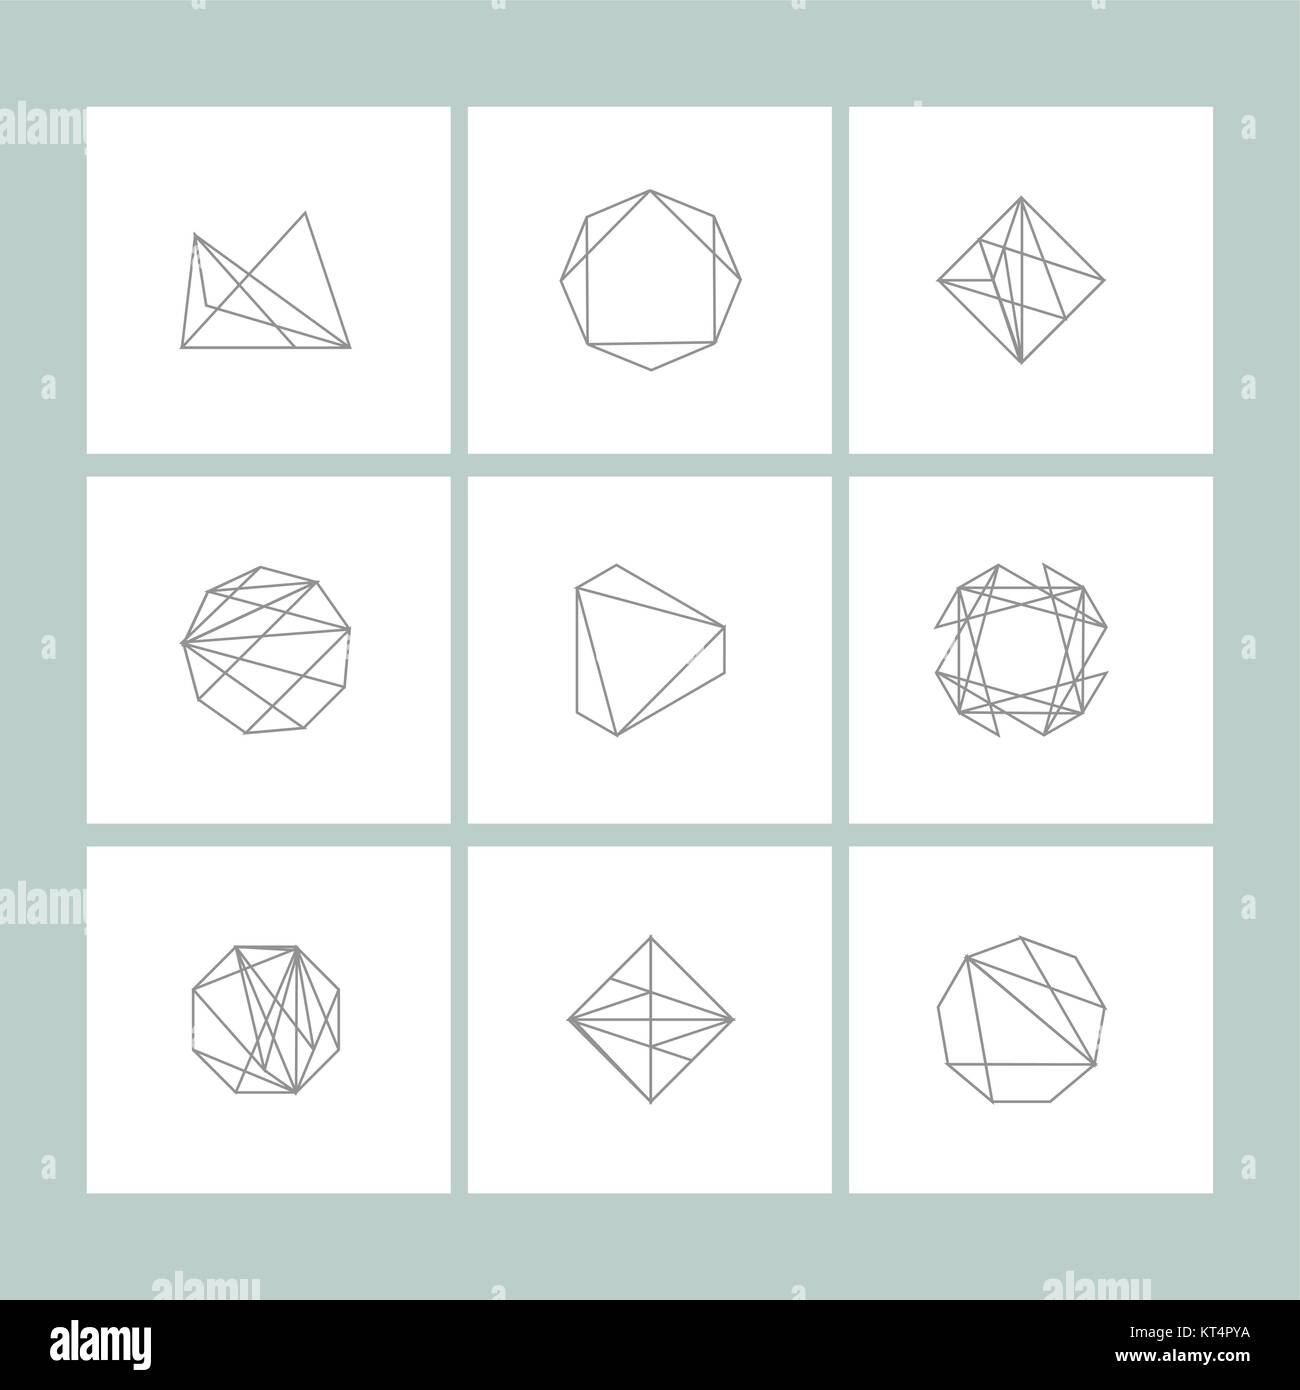 Set of symbol and shapes. Trendy icons and logotypes. Business signs symbols, labels, badges, frames and borders Stock Vector